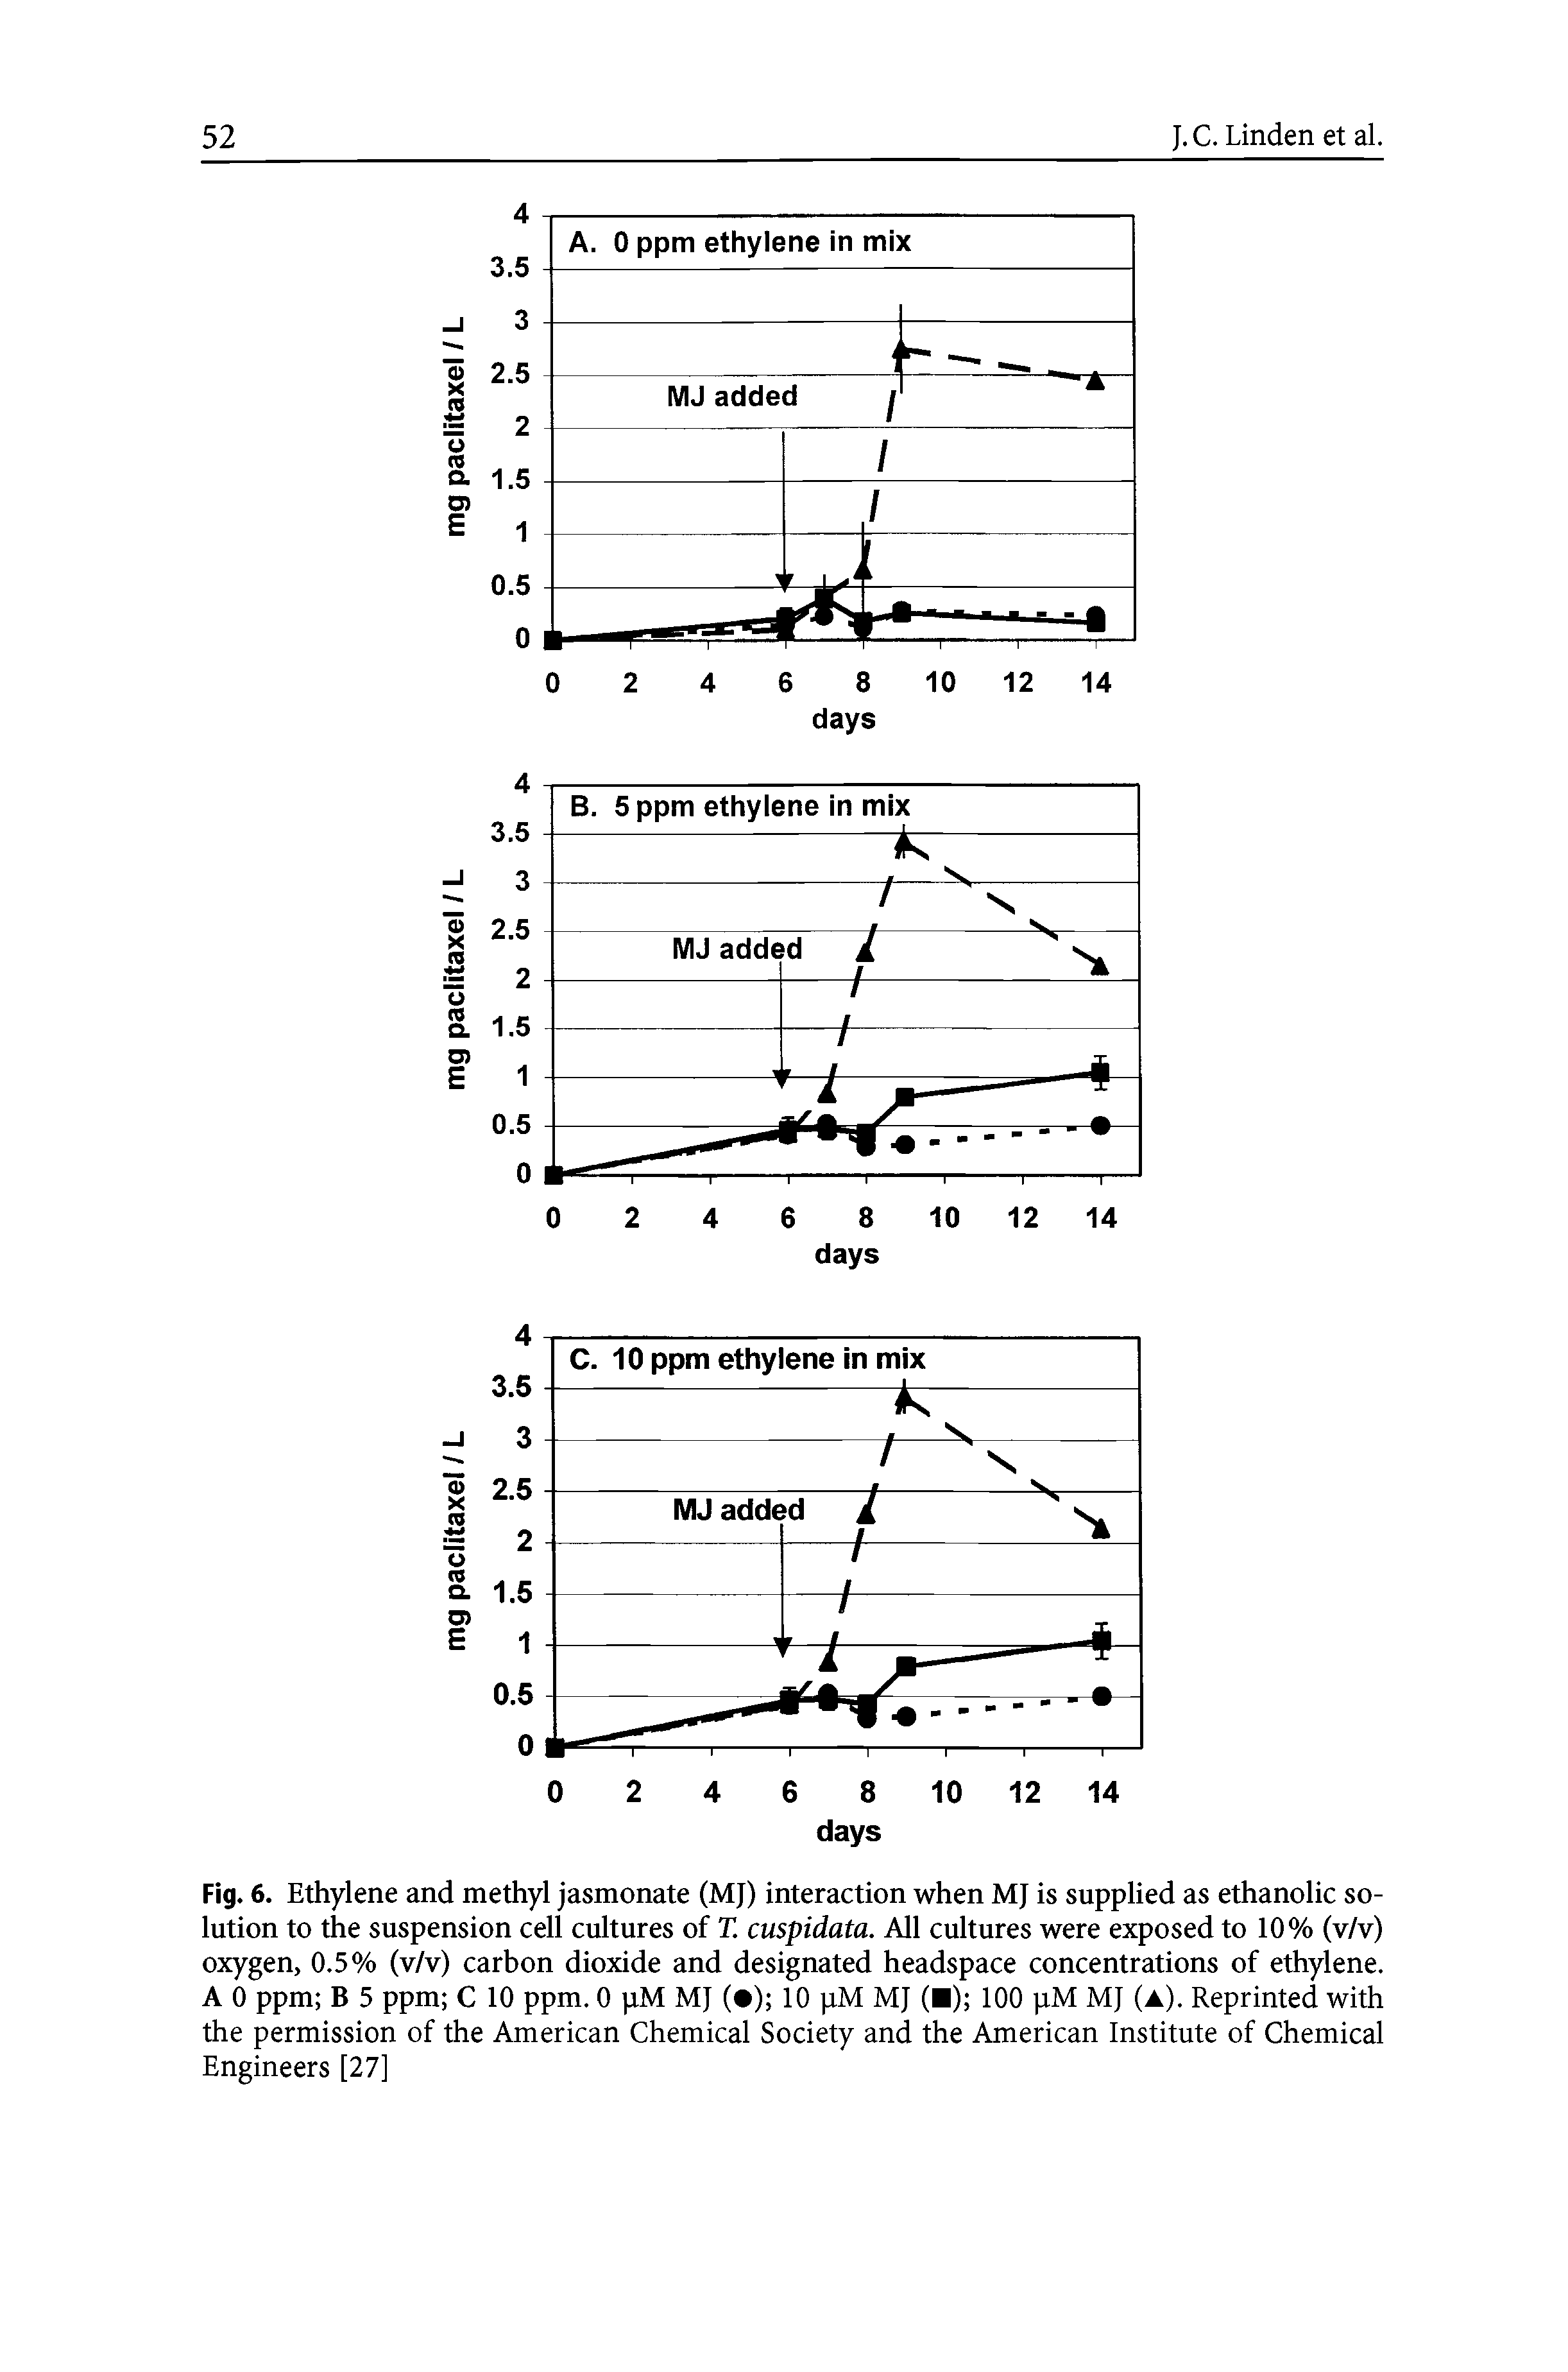 Fig. 6. Ethylene and methyl jasmonate (MJ) interaction when MJ is supplied as ethanolic solution to the suspension cell cultures of T. cuspidata. All cultures were exposed to 10% (v/v) oxygen, 0.5% (v/v) carbon dioxide and designated headspace concentrations of ethylene. A 0 ppm B 5 ppm C 10 ppm. 0 pM MJ ( ) 10 pM MJ ( ) 100 pM MJ (a). Reprinted with the permission of the American Chemical Society and the American Institute of Chemical Engineers [27]...